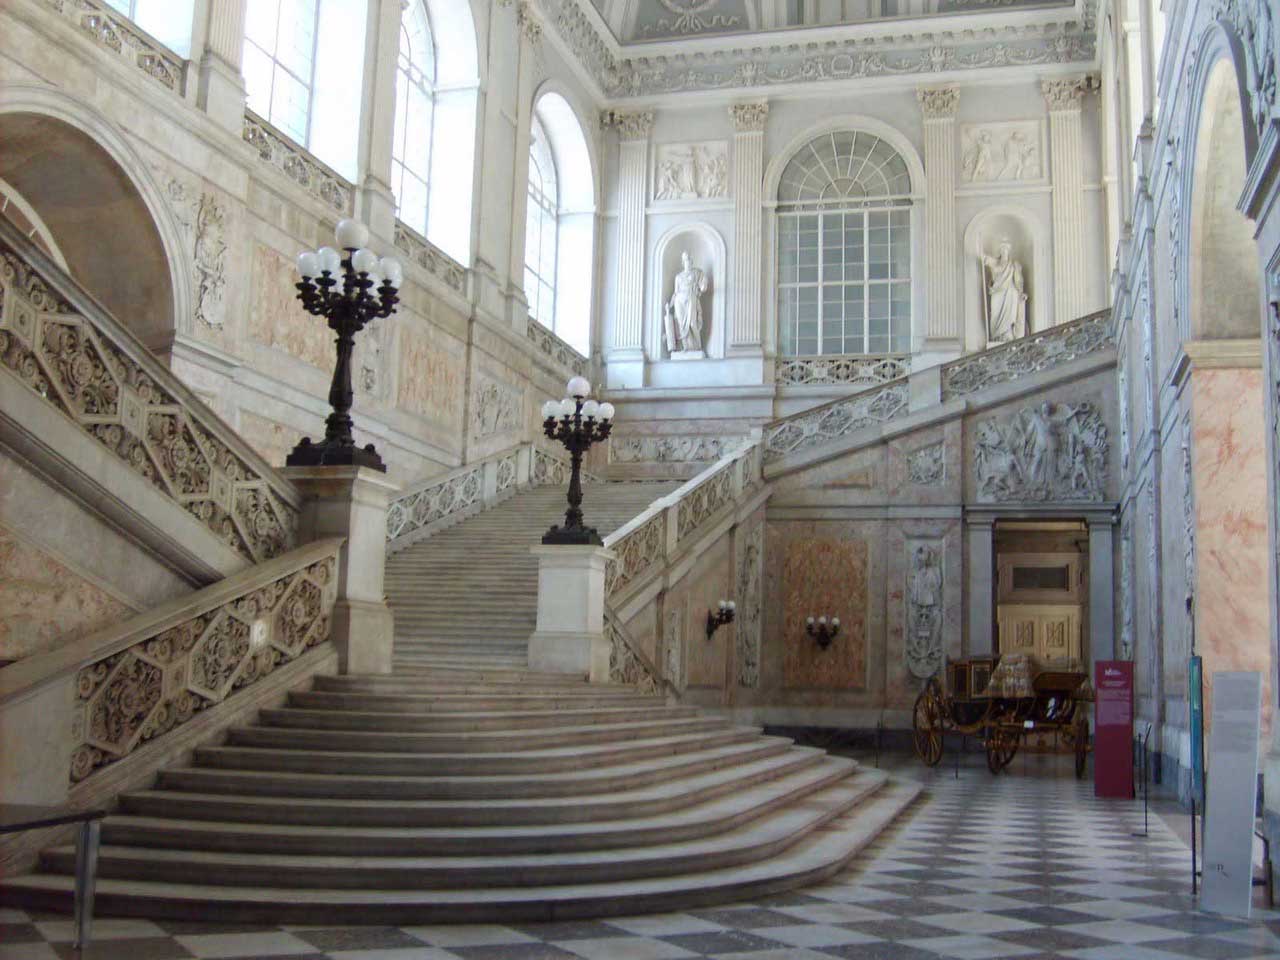 Staircase of Honor also called Monumental Staircase - Royal Palace of Naples